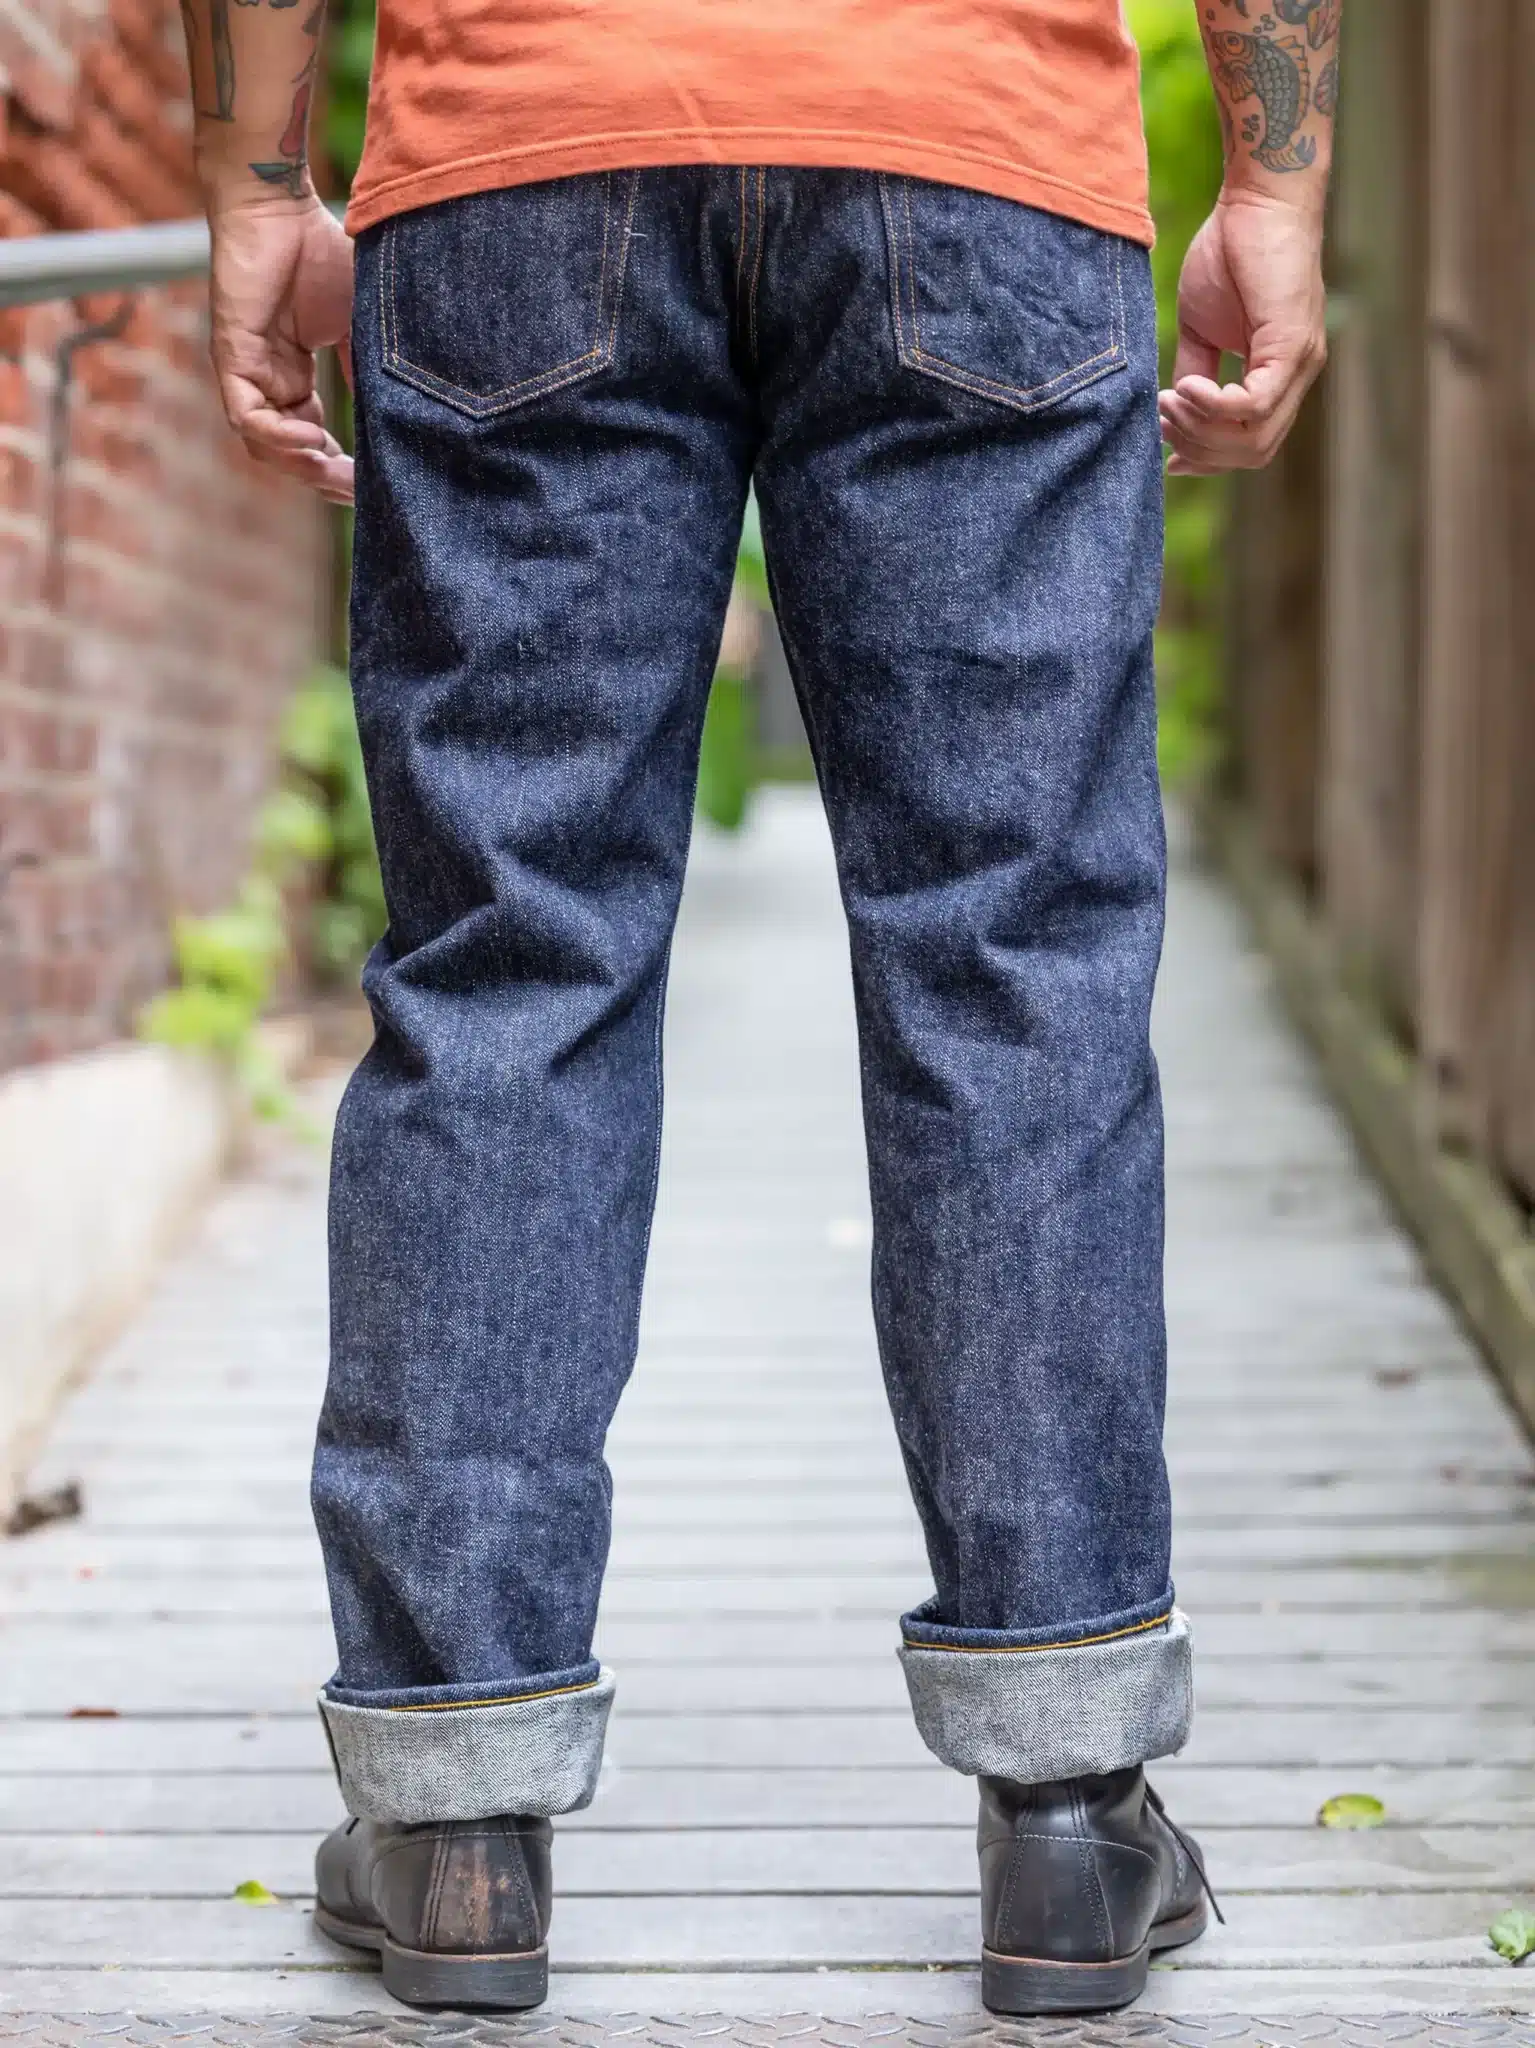 Dwell Wetland svært The Selvedge Masterlist: Our Ultimate Jeans Guide - Denimhunters